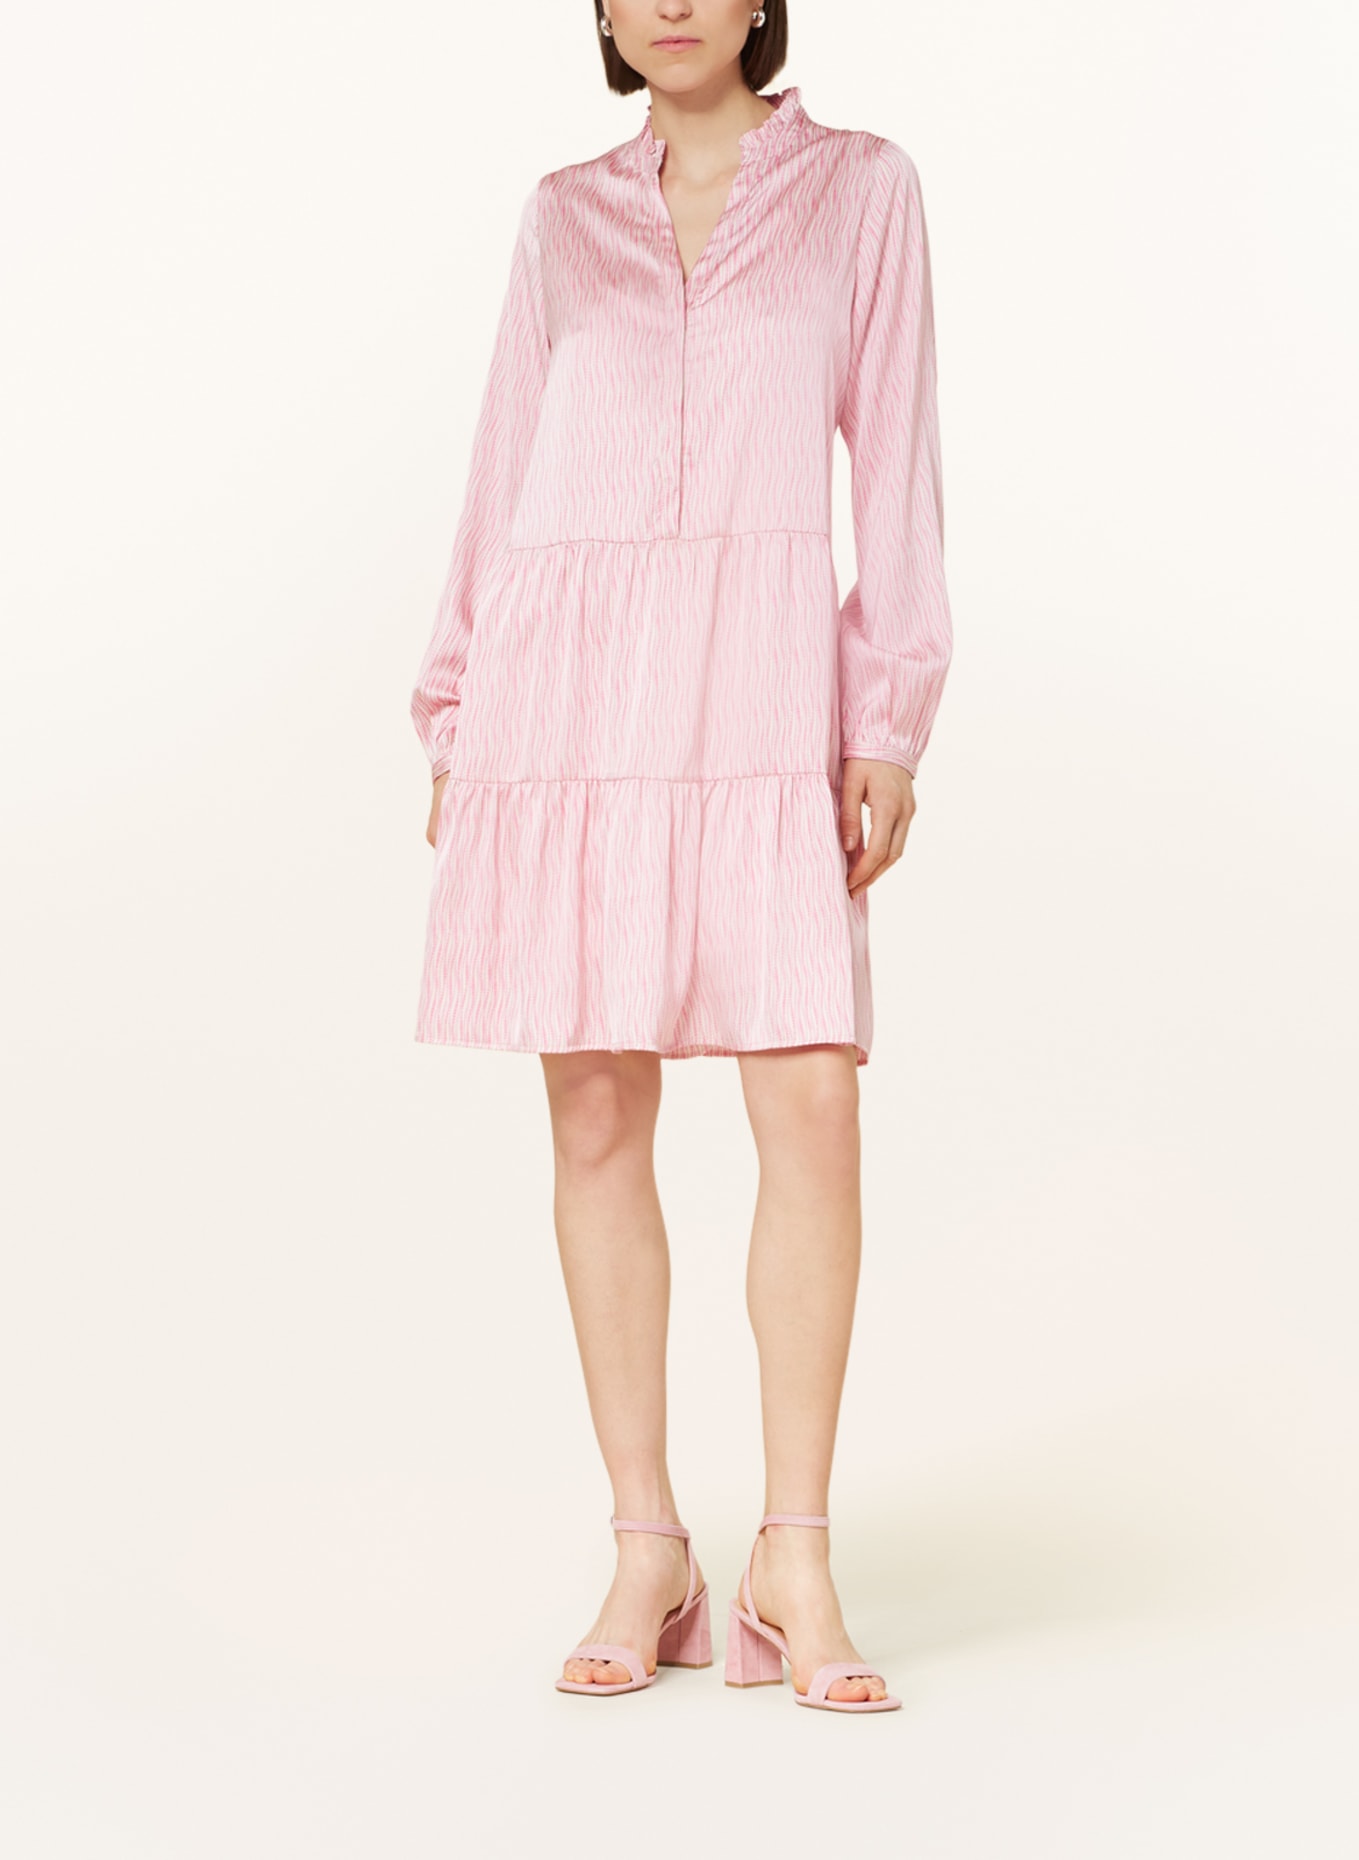 NEO NOIR Dress FEDERICA with ruffles, Color: PINK/ PINK/ WHITE (Image 2)